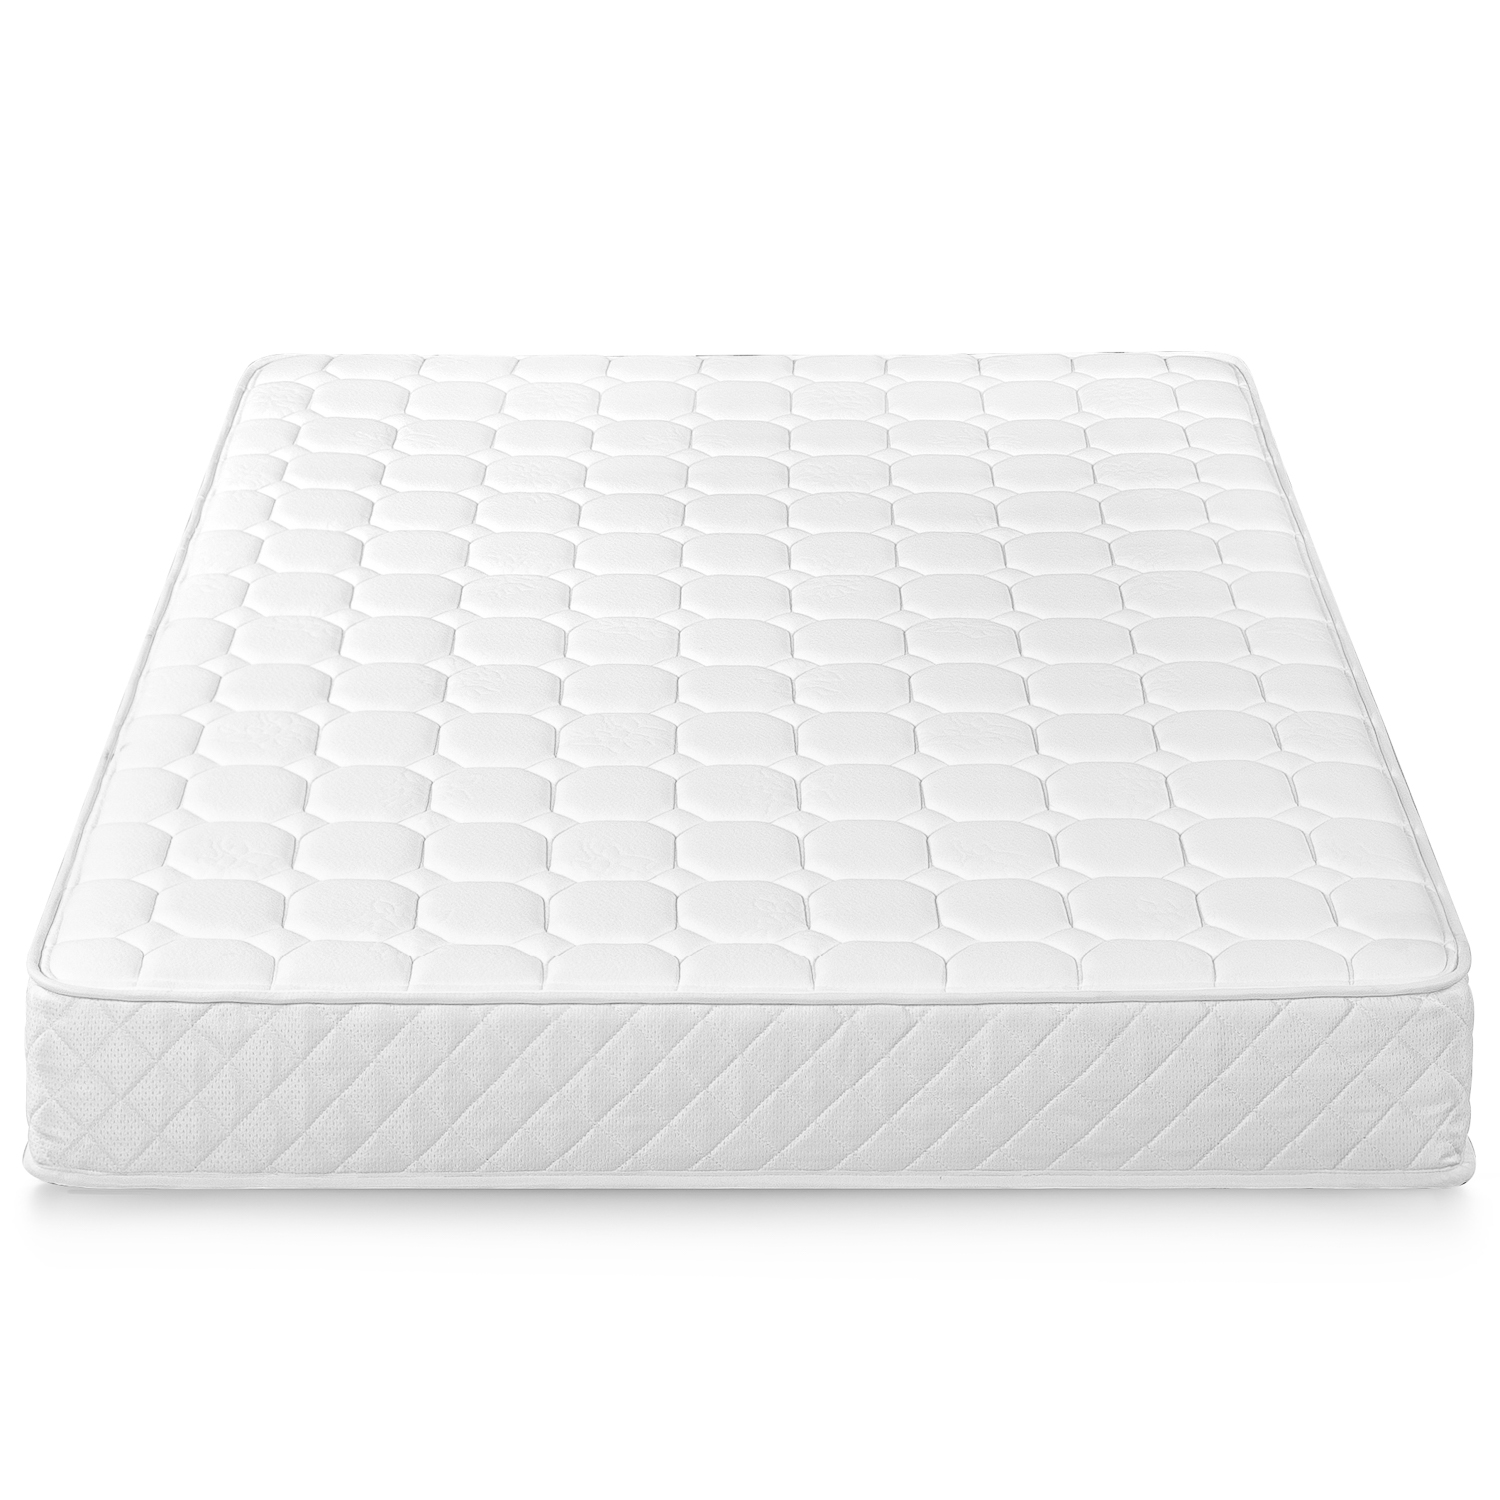 8" Quilted Hybrid of Comfort Foam and Pocket Spring Mattress, Full - image 1 of 5